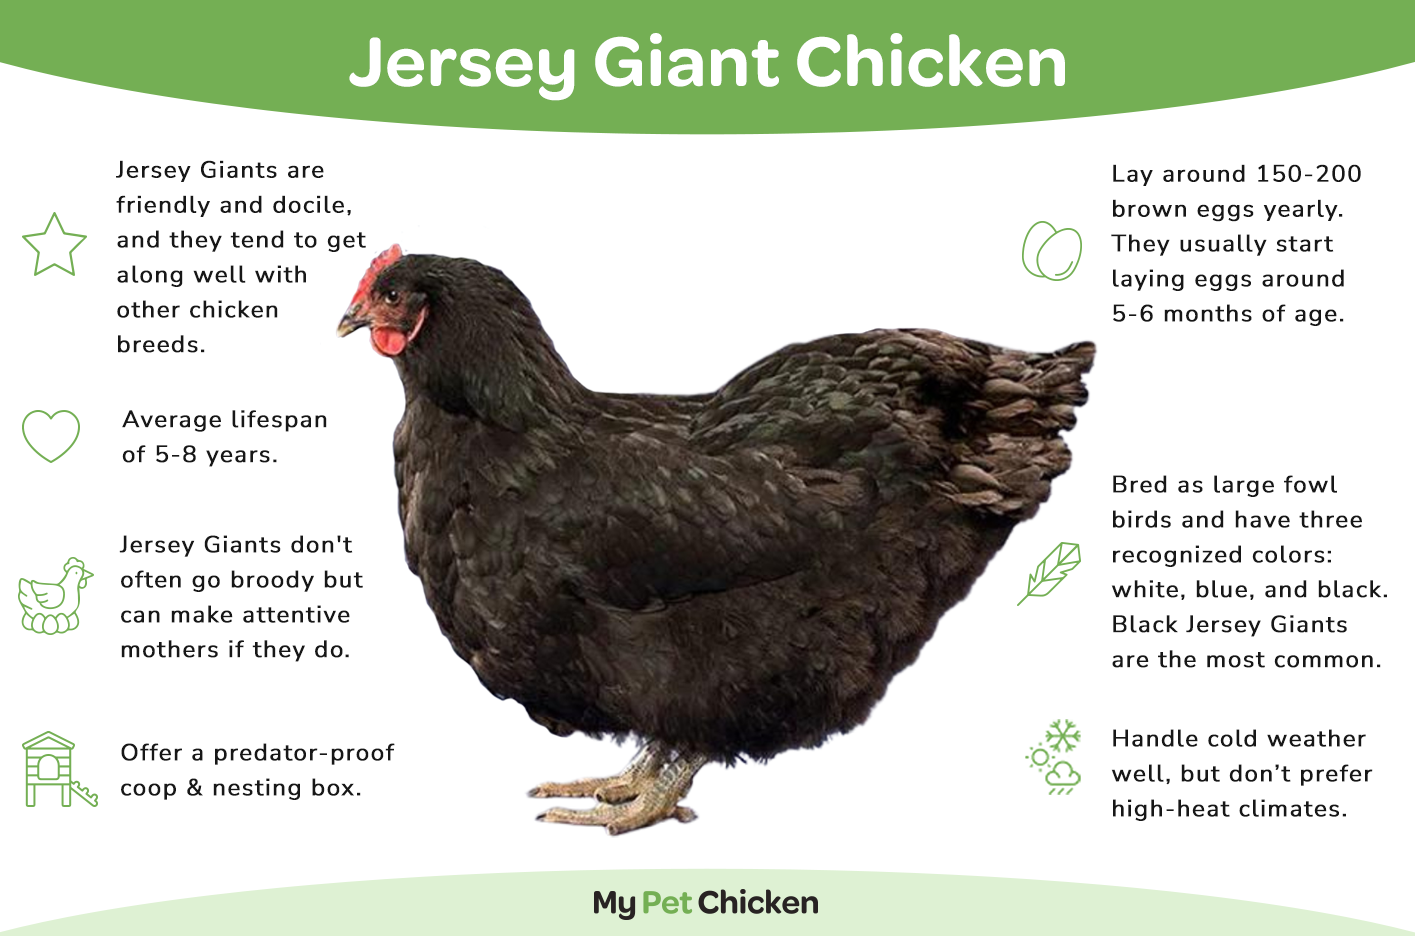 The Jersey Giant chicken breed is a friendly bird that lays extra large brown eggs.